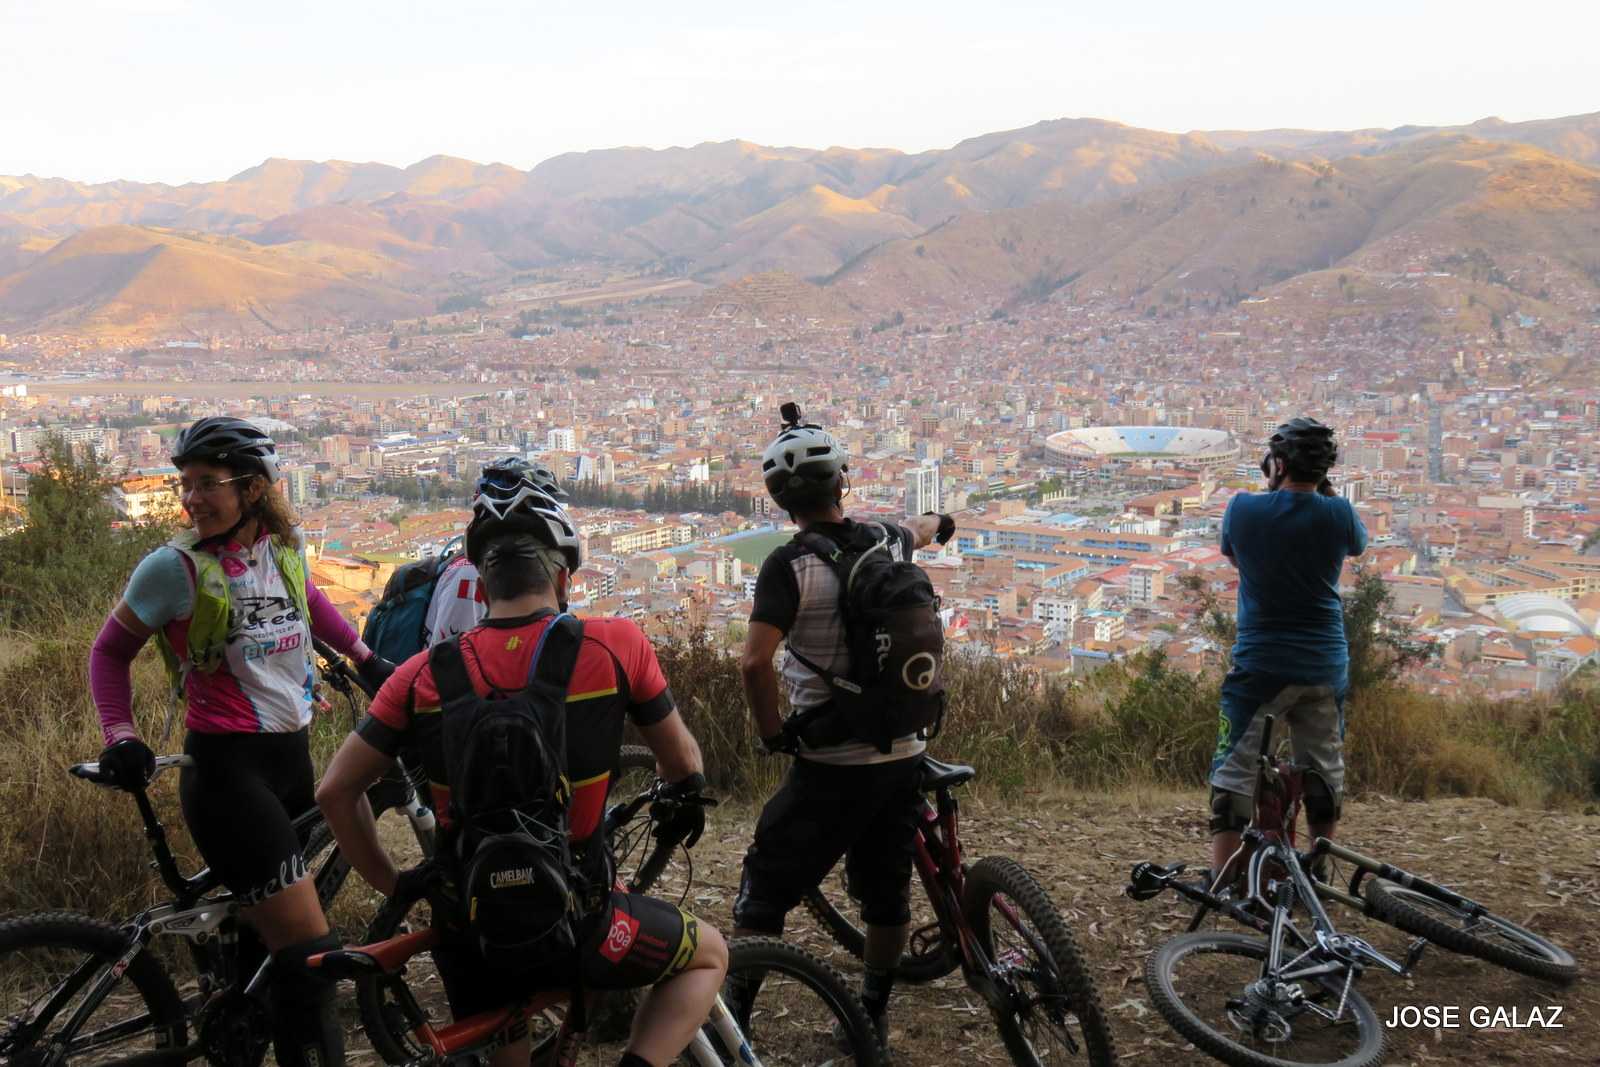 Five mountain bikers sitting on bikes high up on a hill, looking out over the red tile roofs in the valley below